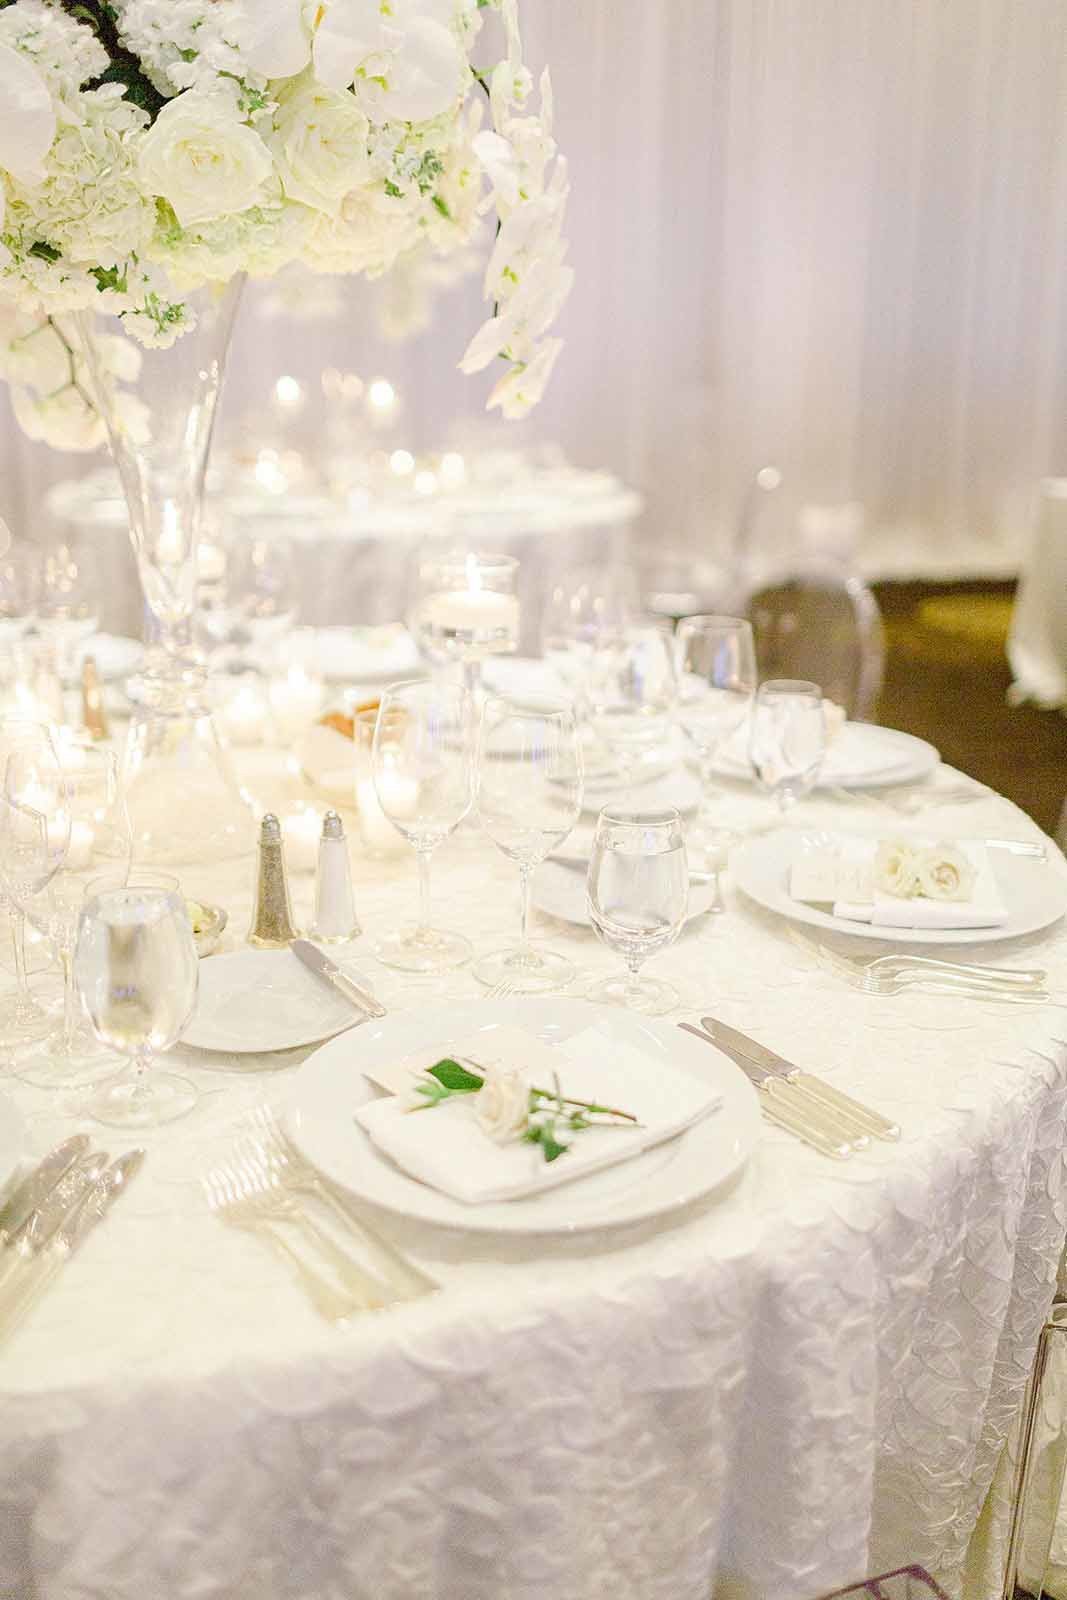 dinner table with white table linen, white flower centerpiece, candles, and draped walls